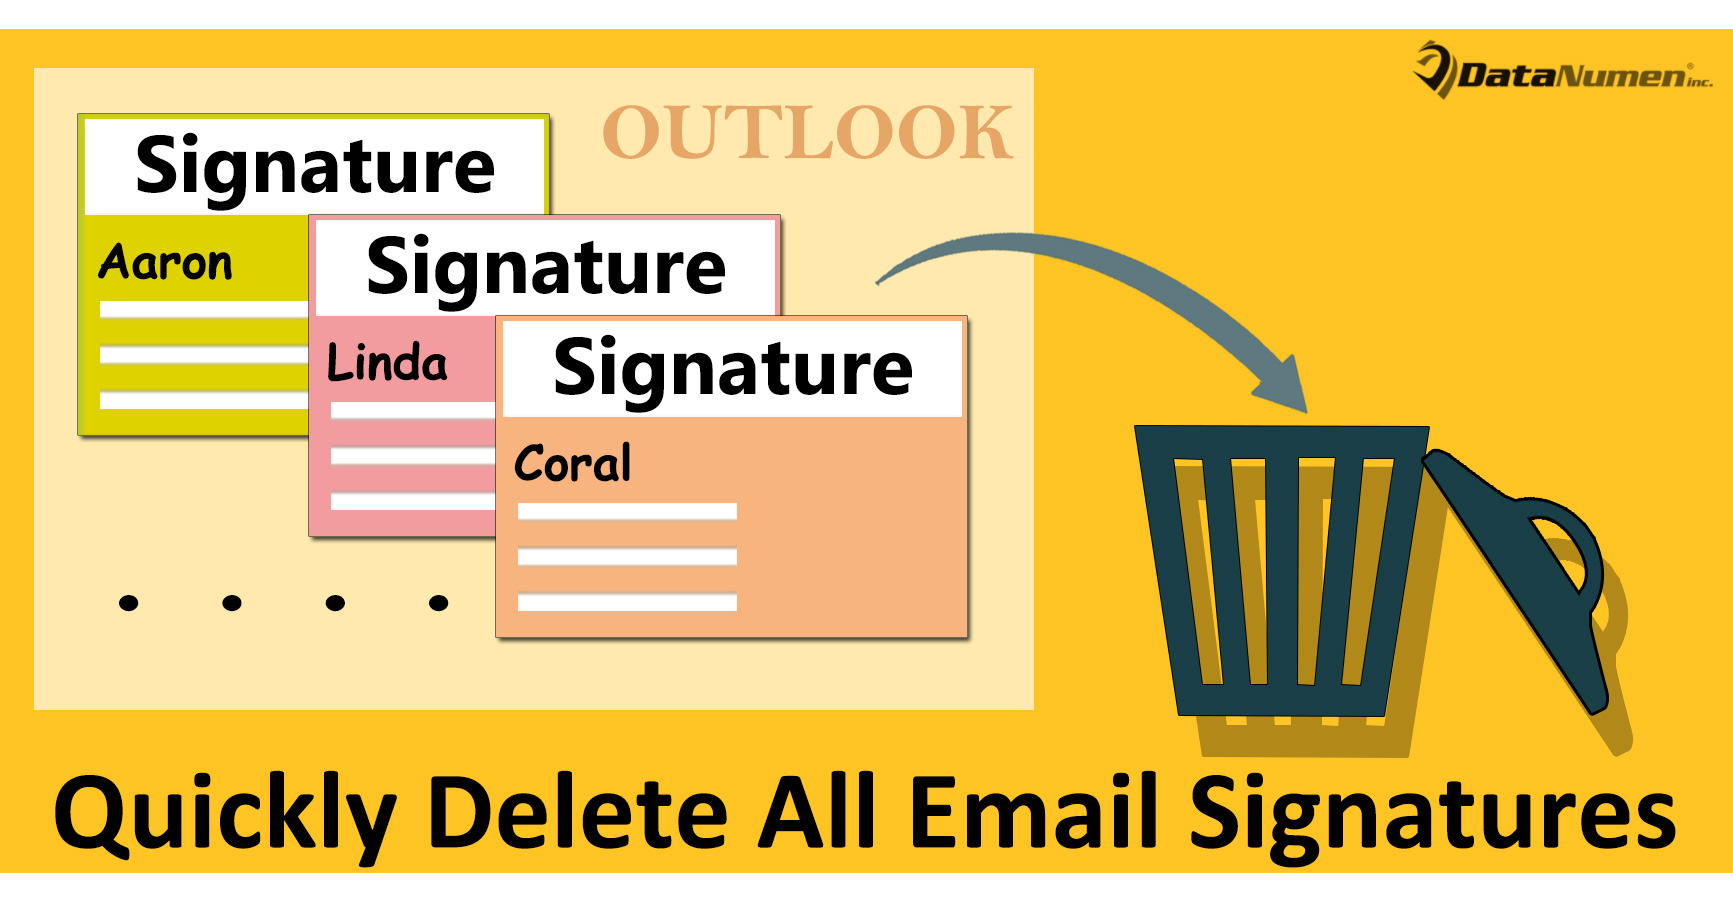 Quickly Delete All Email Signatures in Your Outlook